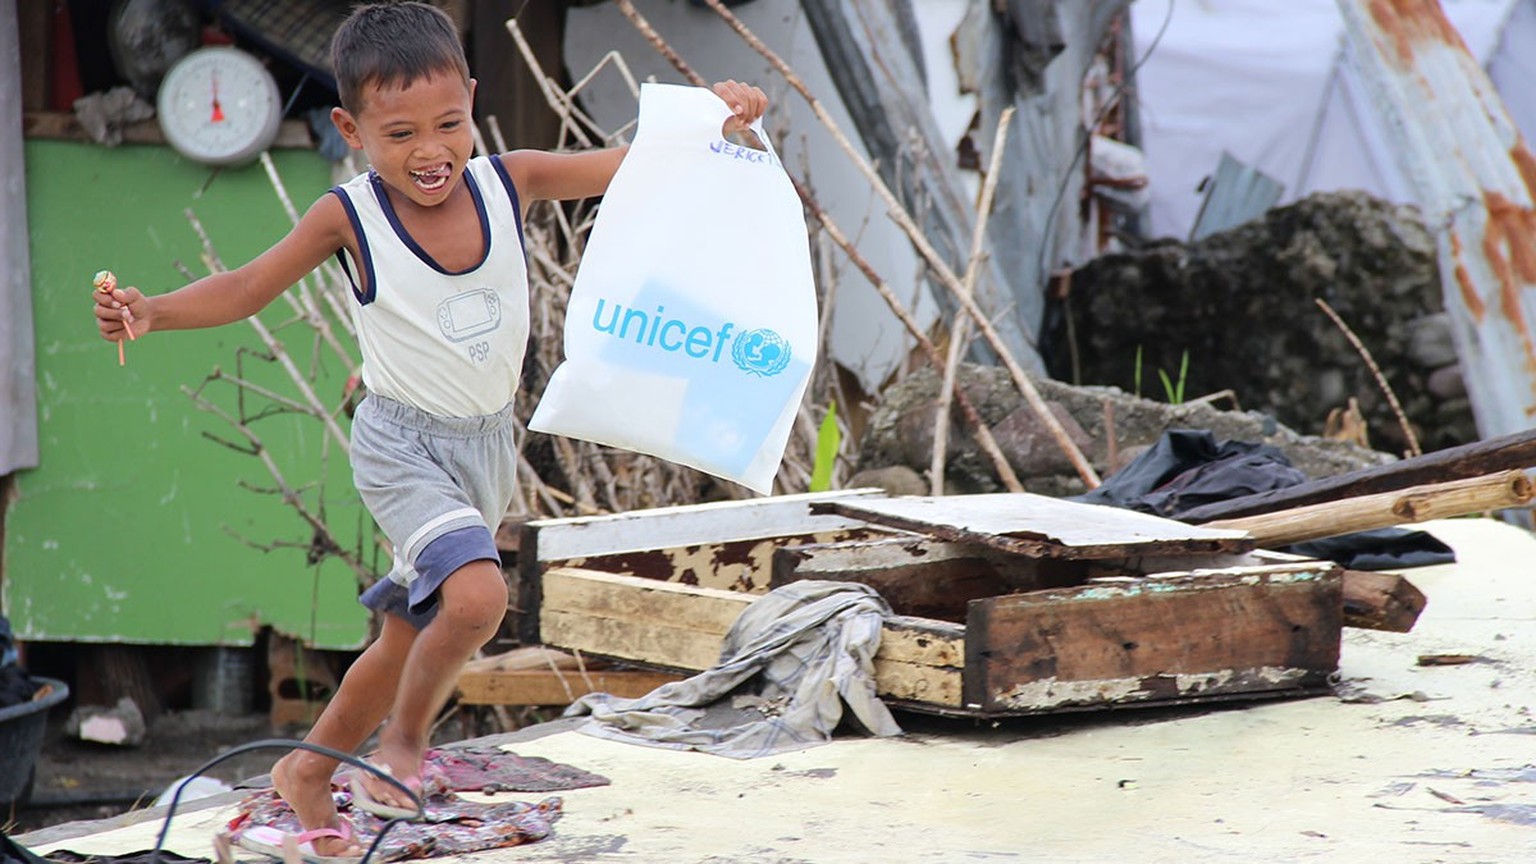 Philippines, December 2013. 6 year old Jerick with a bag of UNICEF school supplies.

Dylene (42), her husband Gonirie (38), and her 7 children live in San Roque. An area which was devastated by Typhoo ...